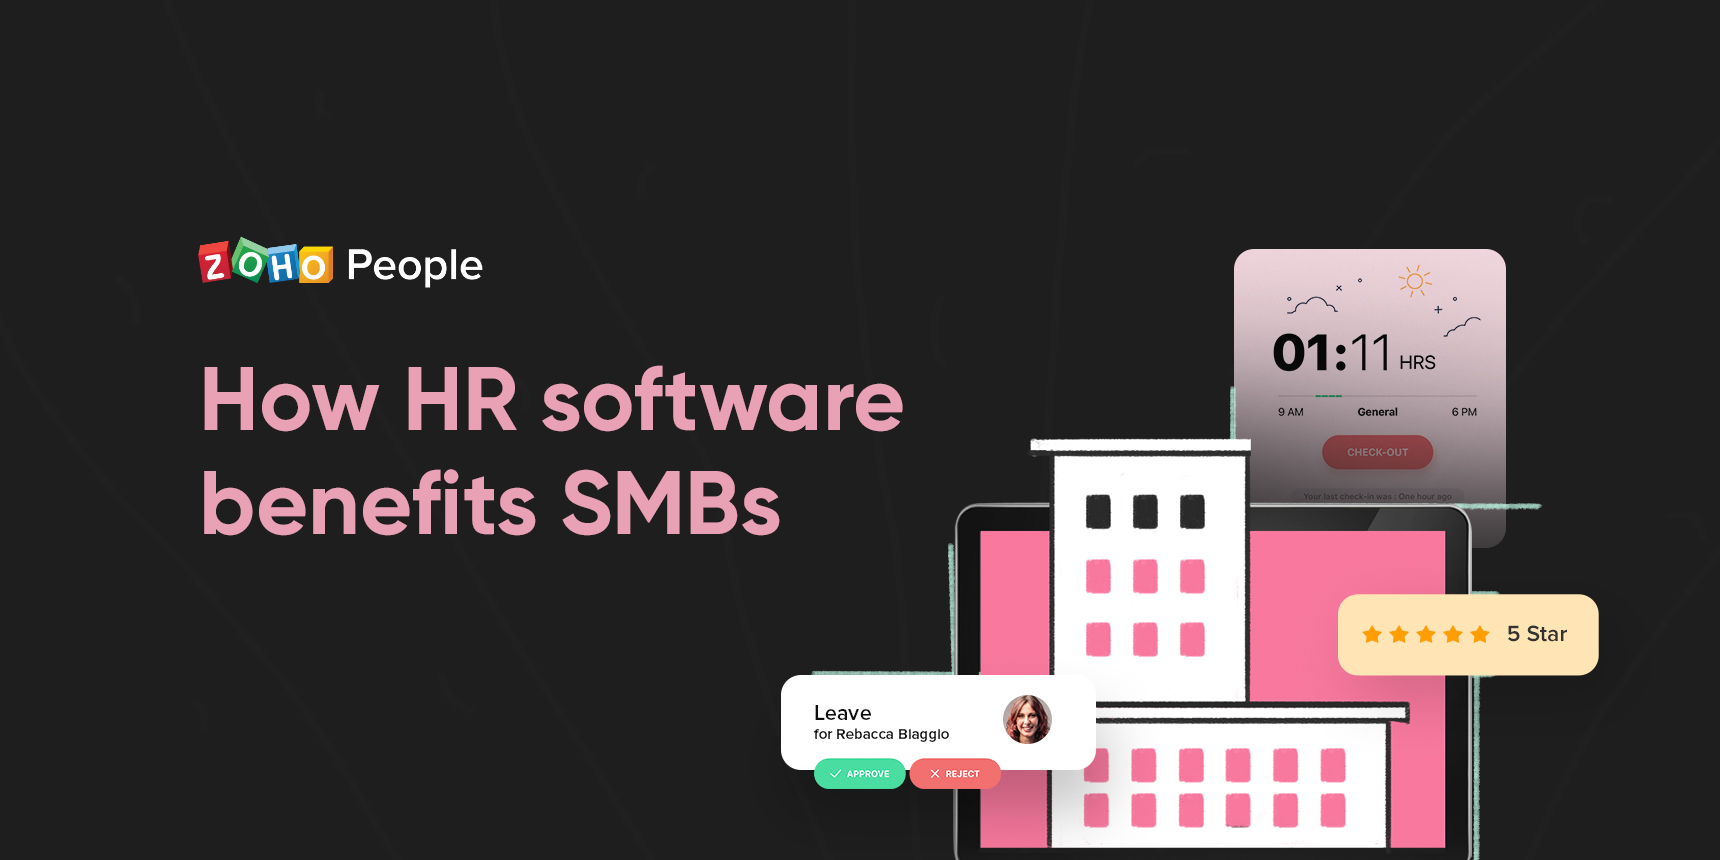 Benefits of HR Software for SMBs